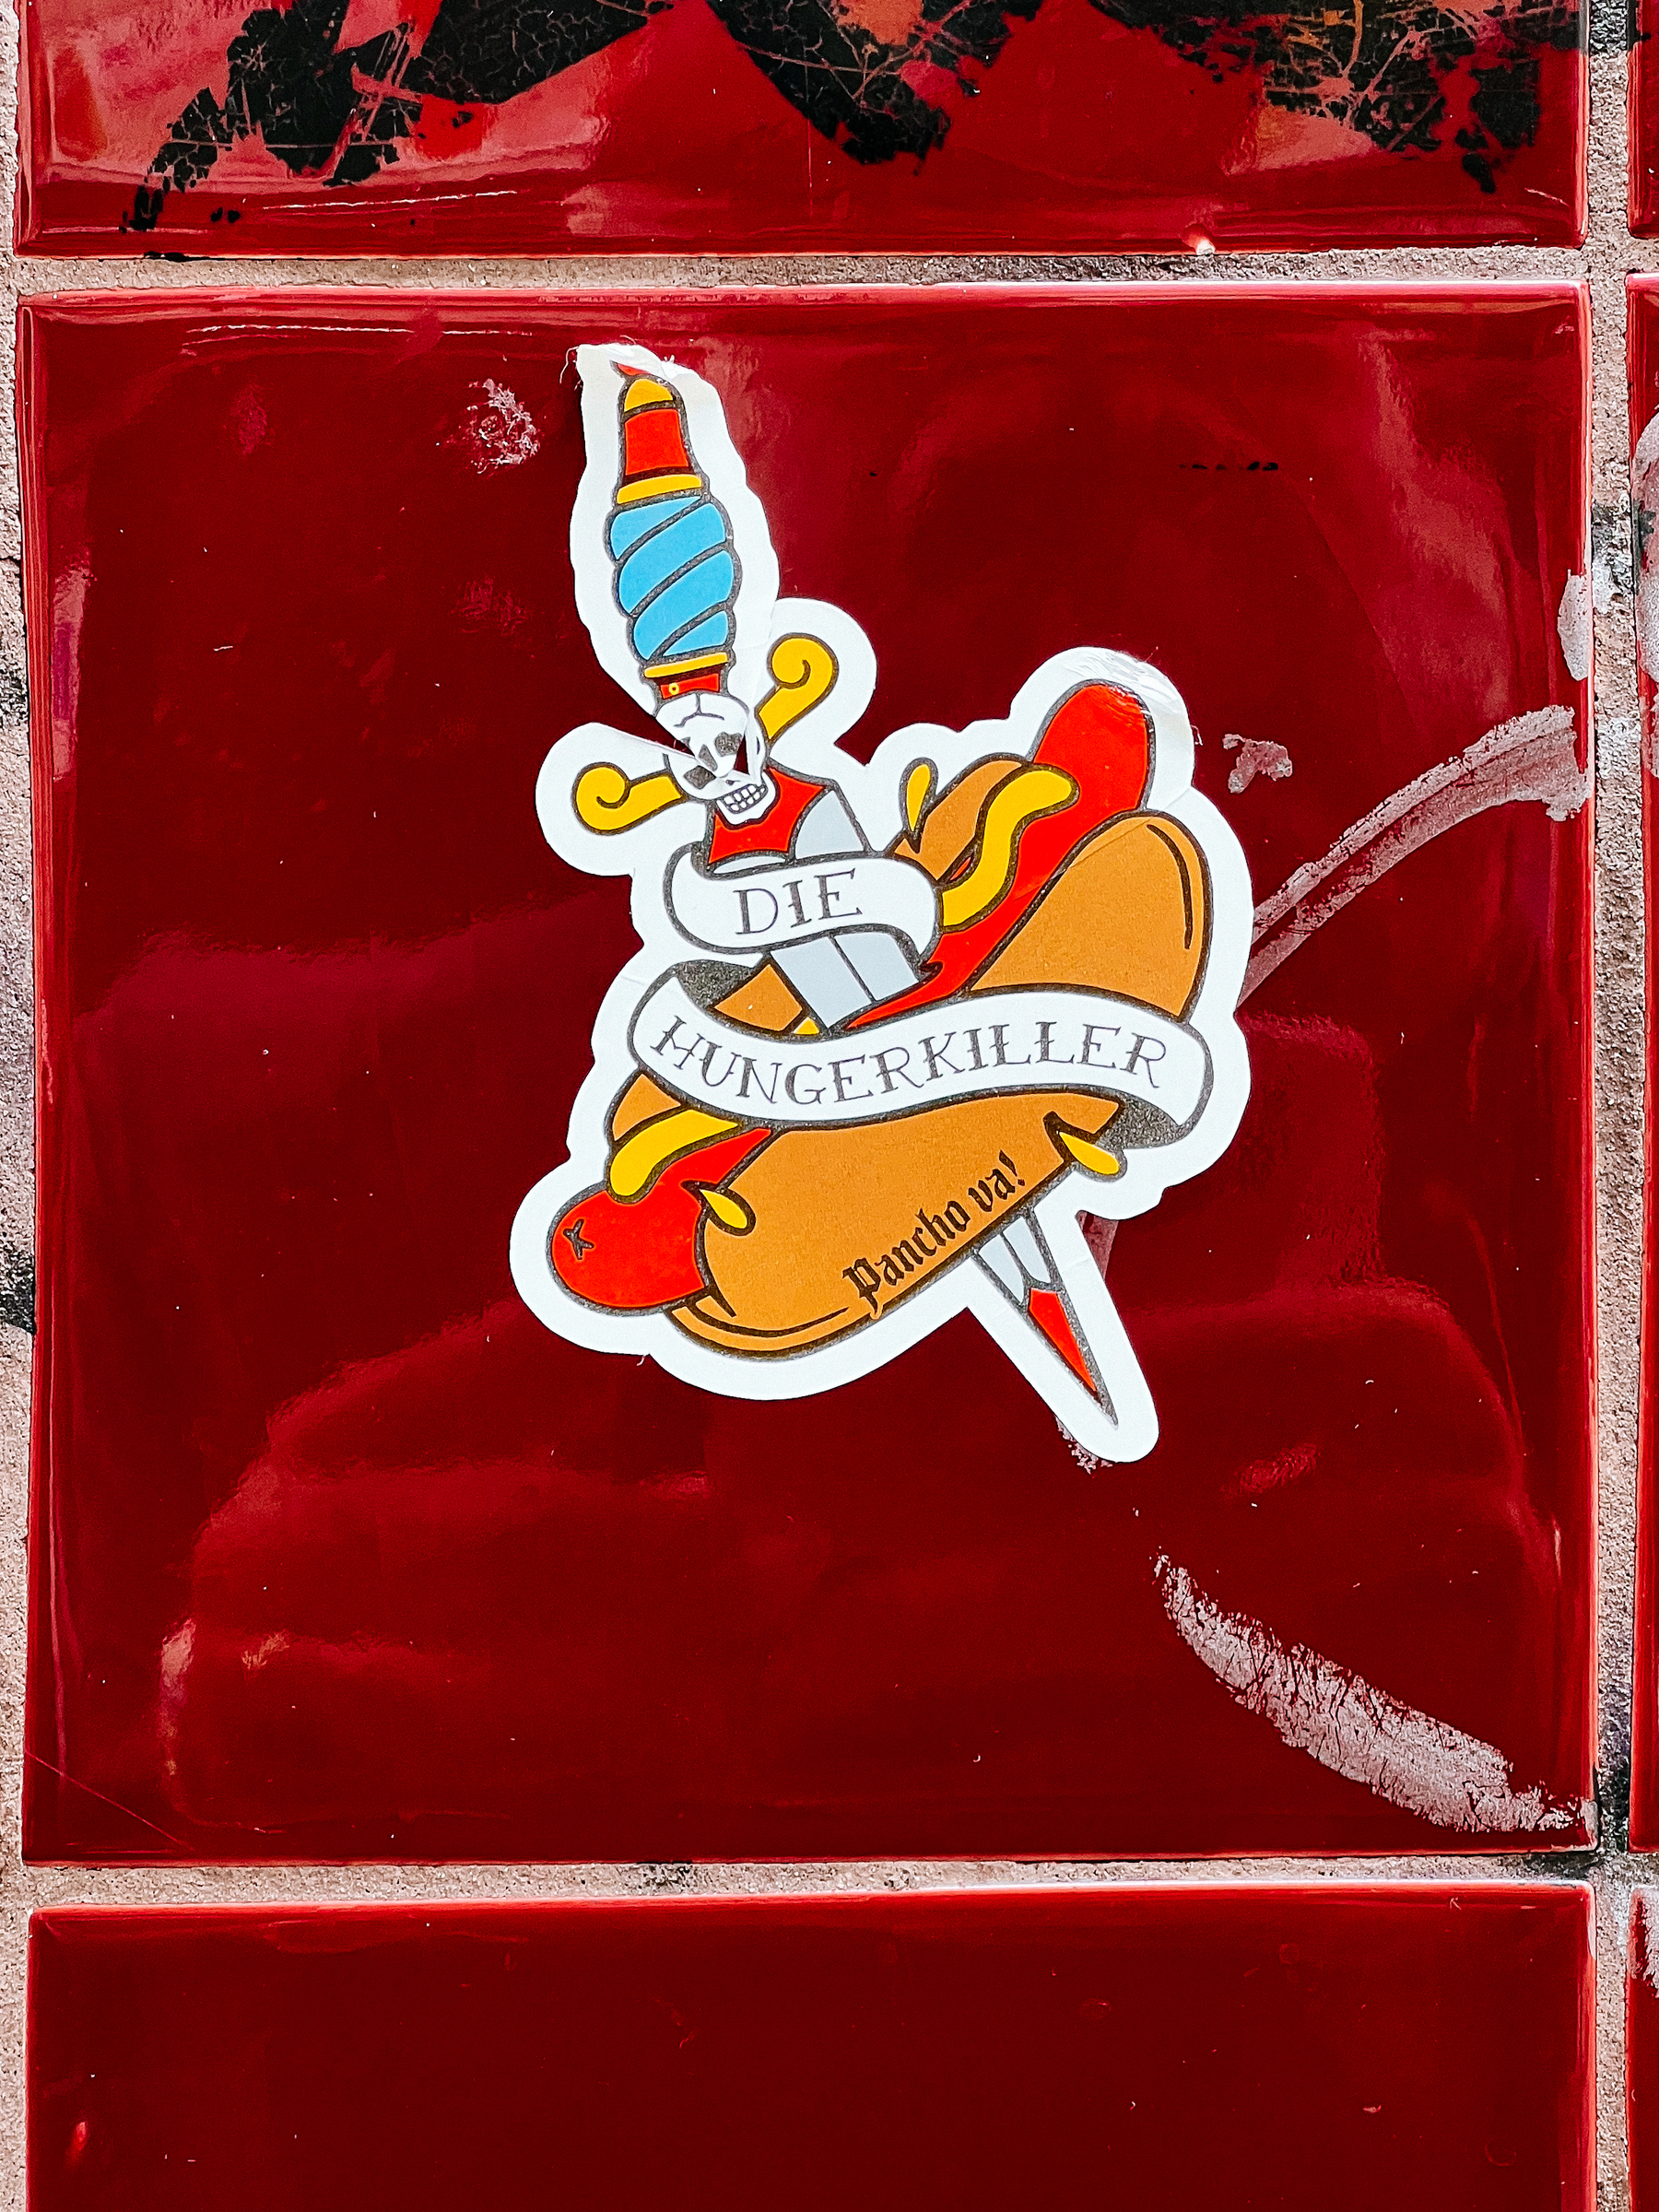 A sticker in classic American tattoo style, with a knife stuck on a hot dog. The words “die hungerkiller” in a banner. 